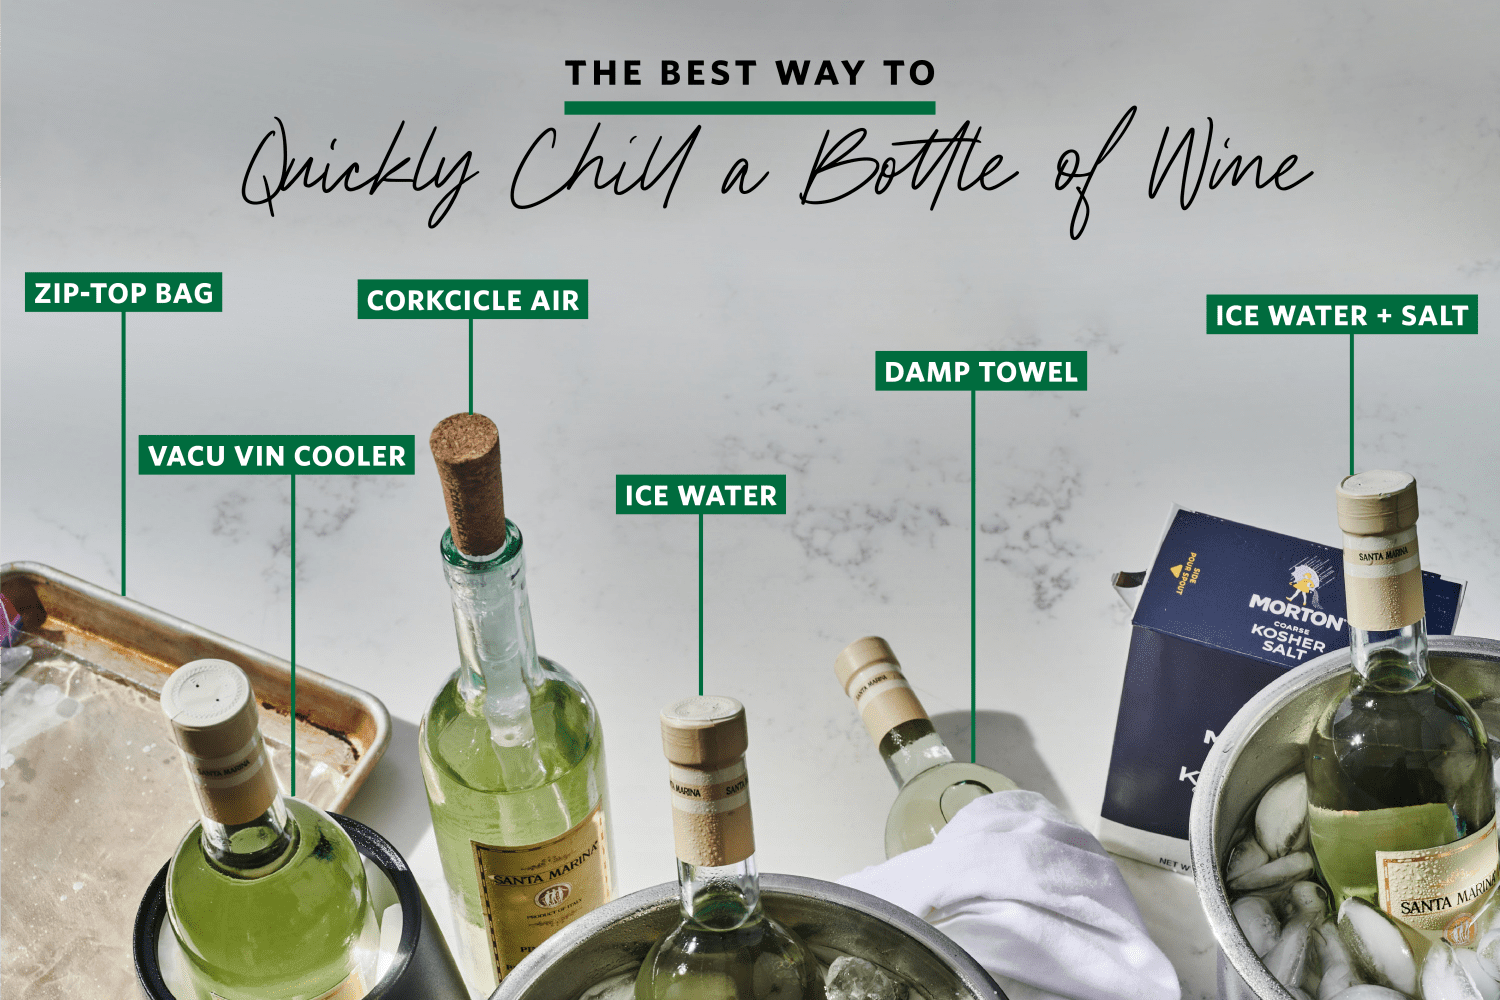 We Tested 6 Different Methods for Quickly Chilling a Bottle of Wine — And the Winner Only Took 15 Minutes